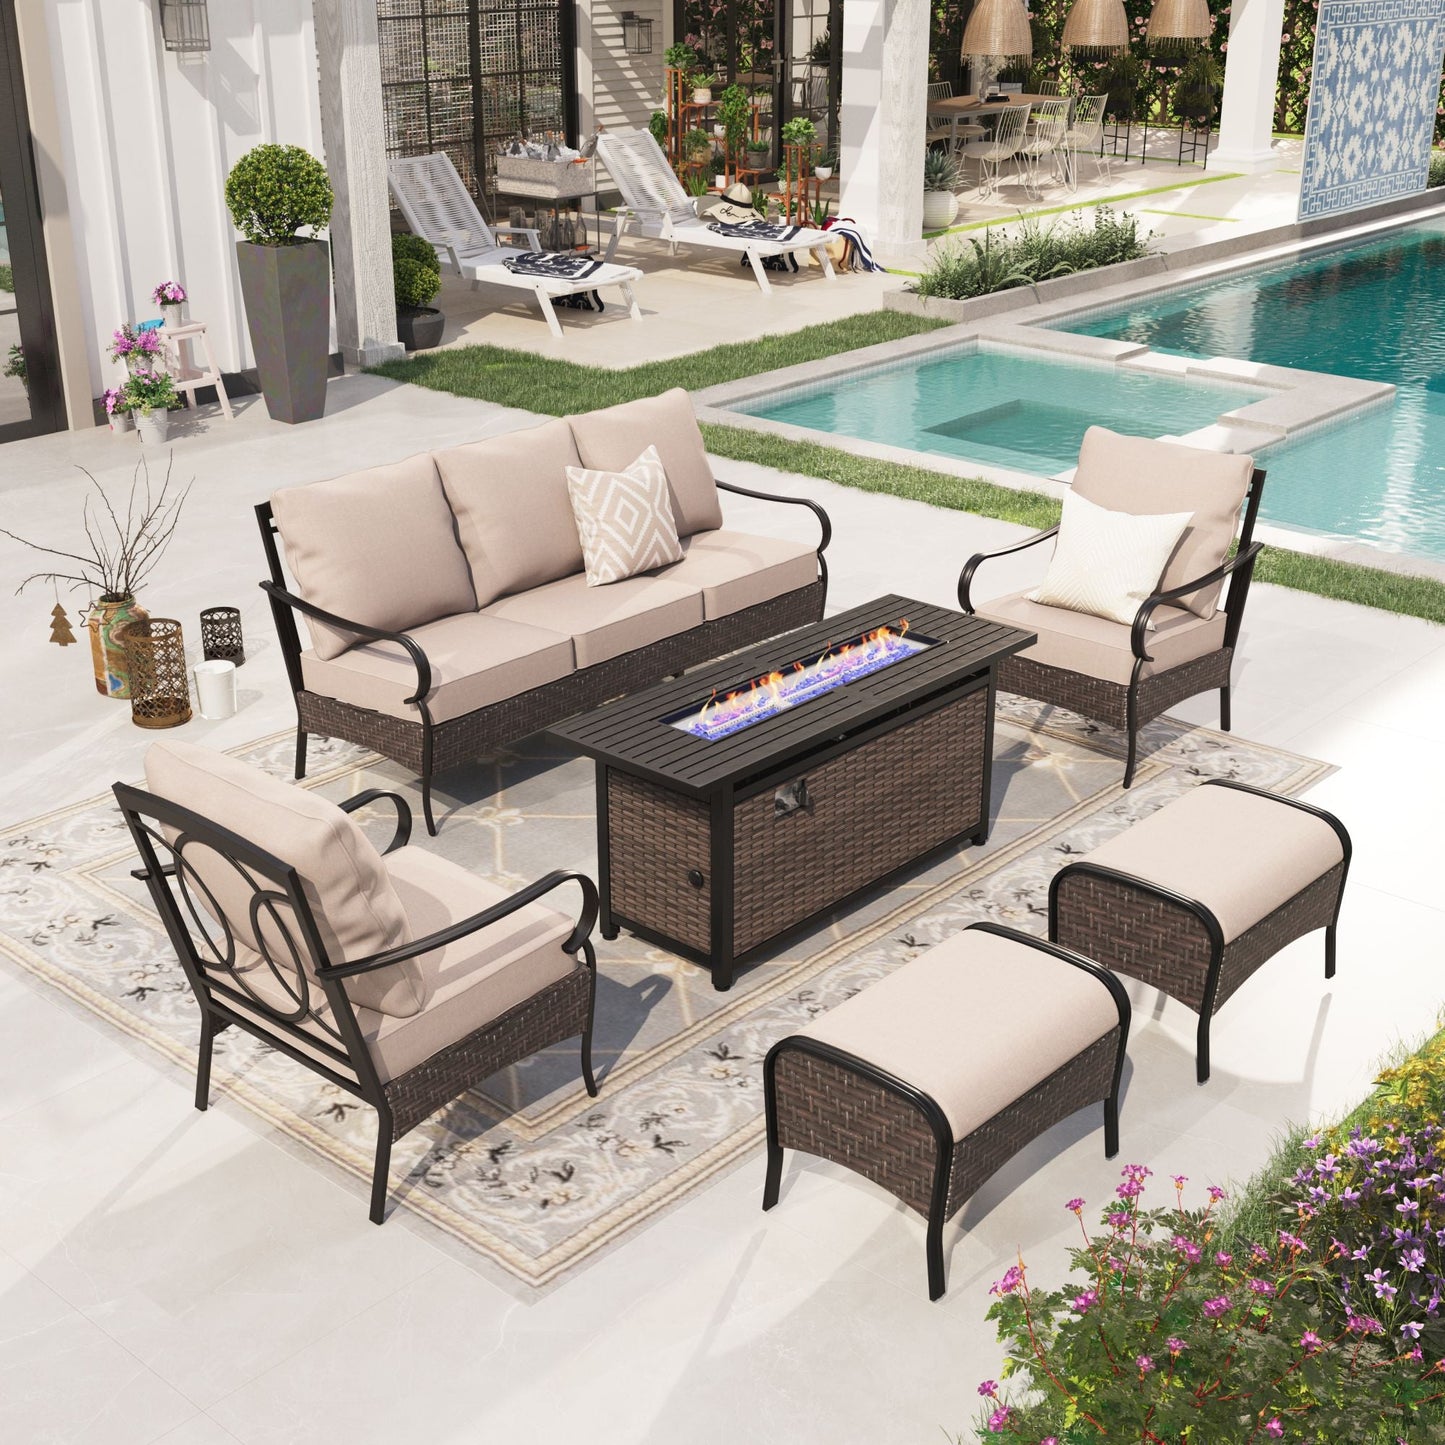 6 Piece Patio Furniture Set with Fire Pit Table 7-Seat Wicker Outdoor Conversation Set